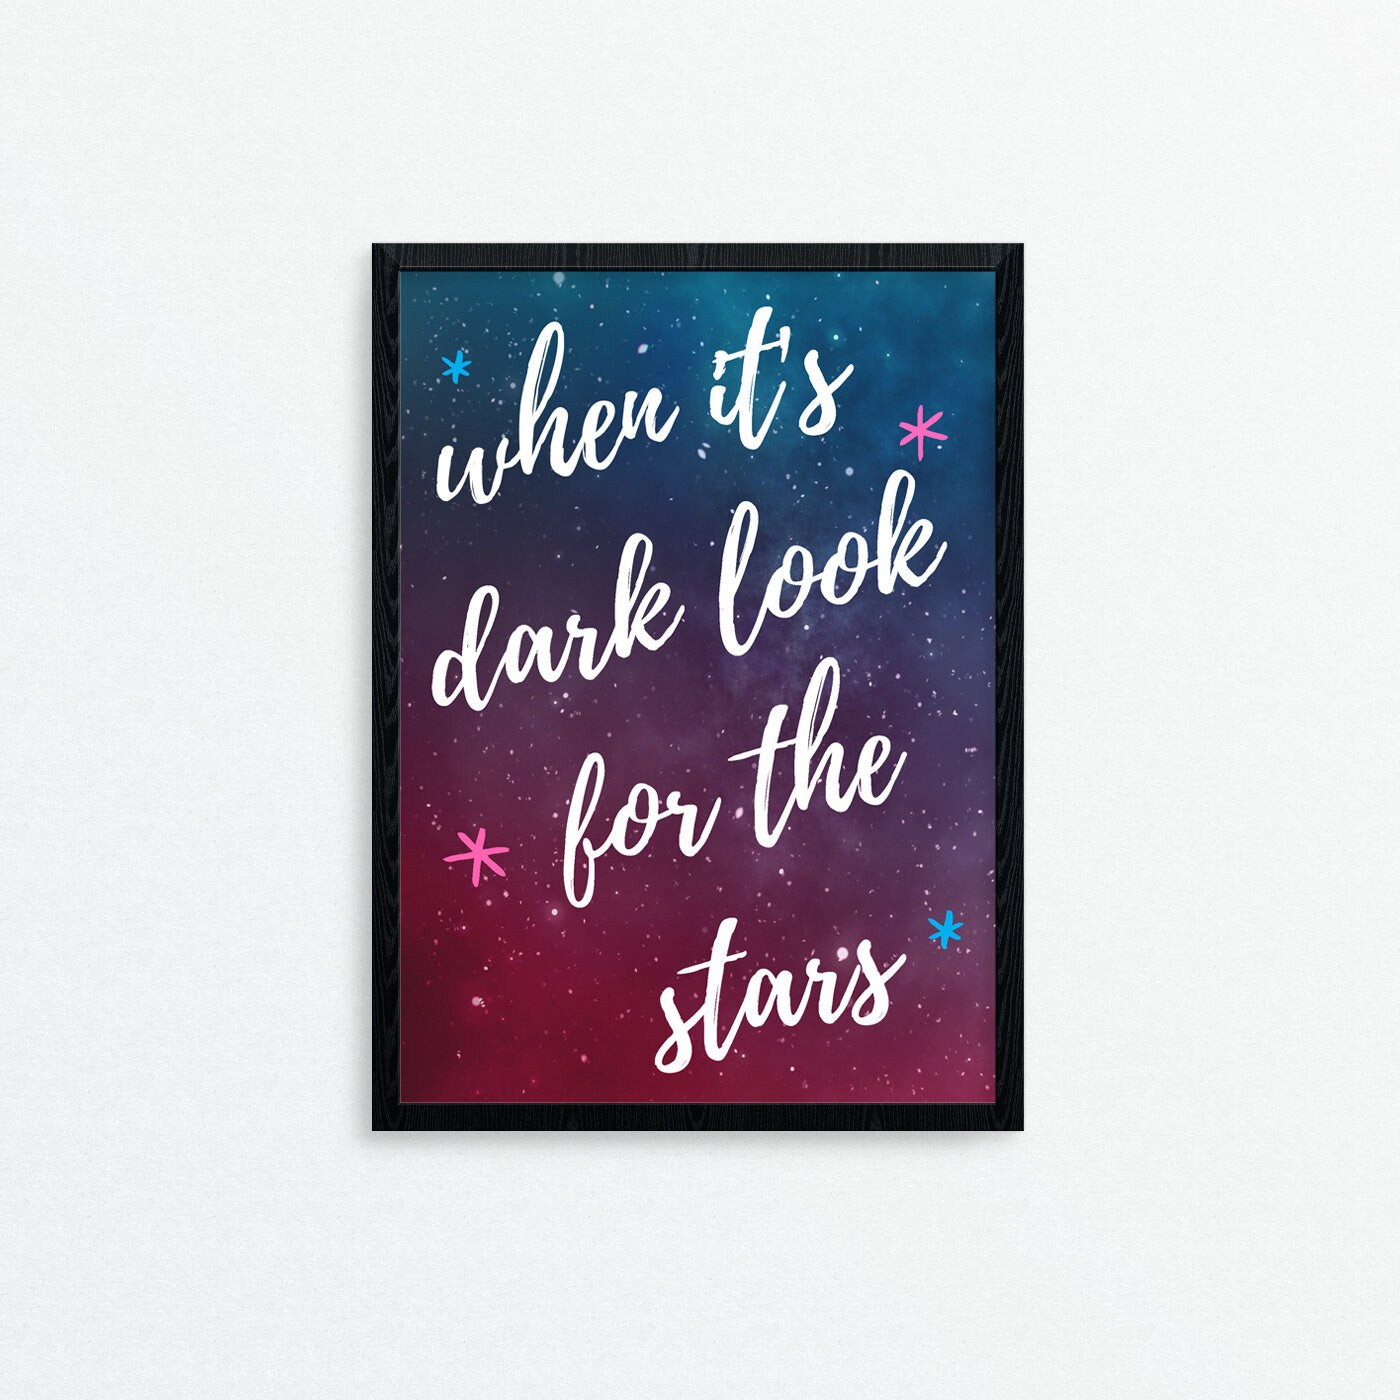 When it's Dark Look for the Stars, A5 Inspirational Print